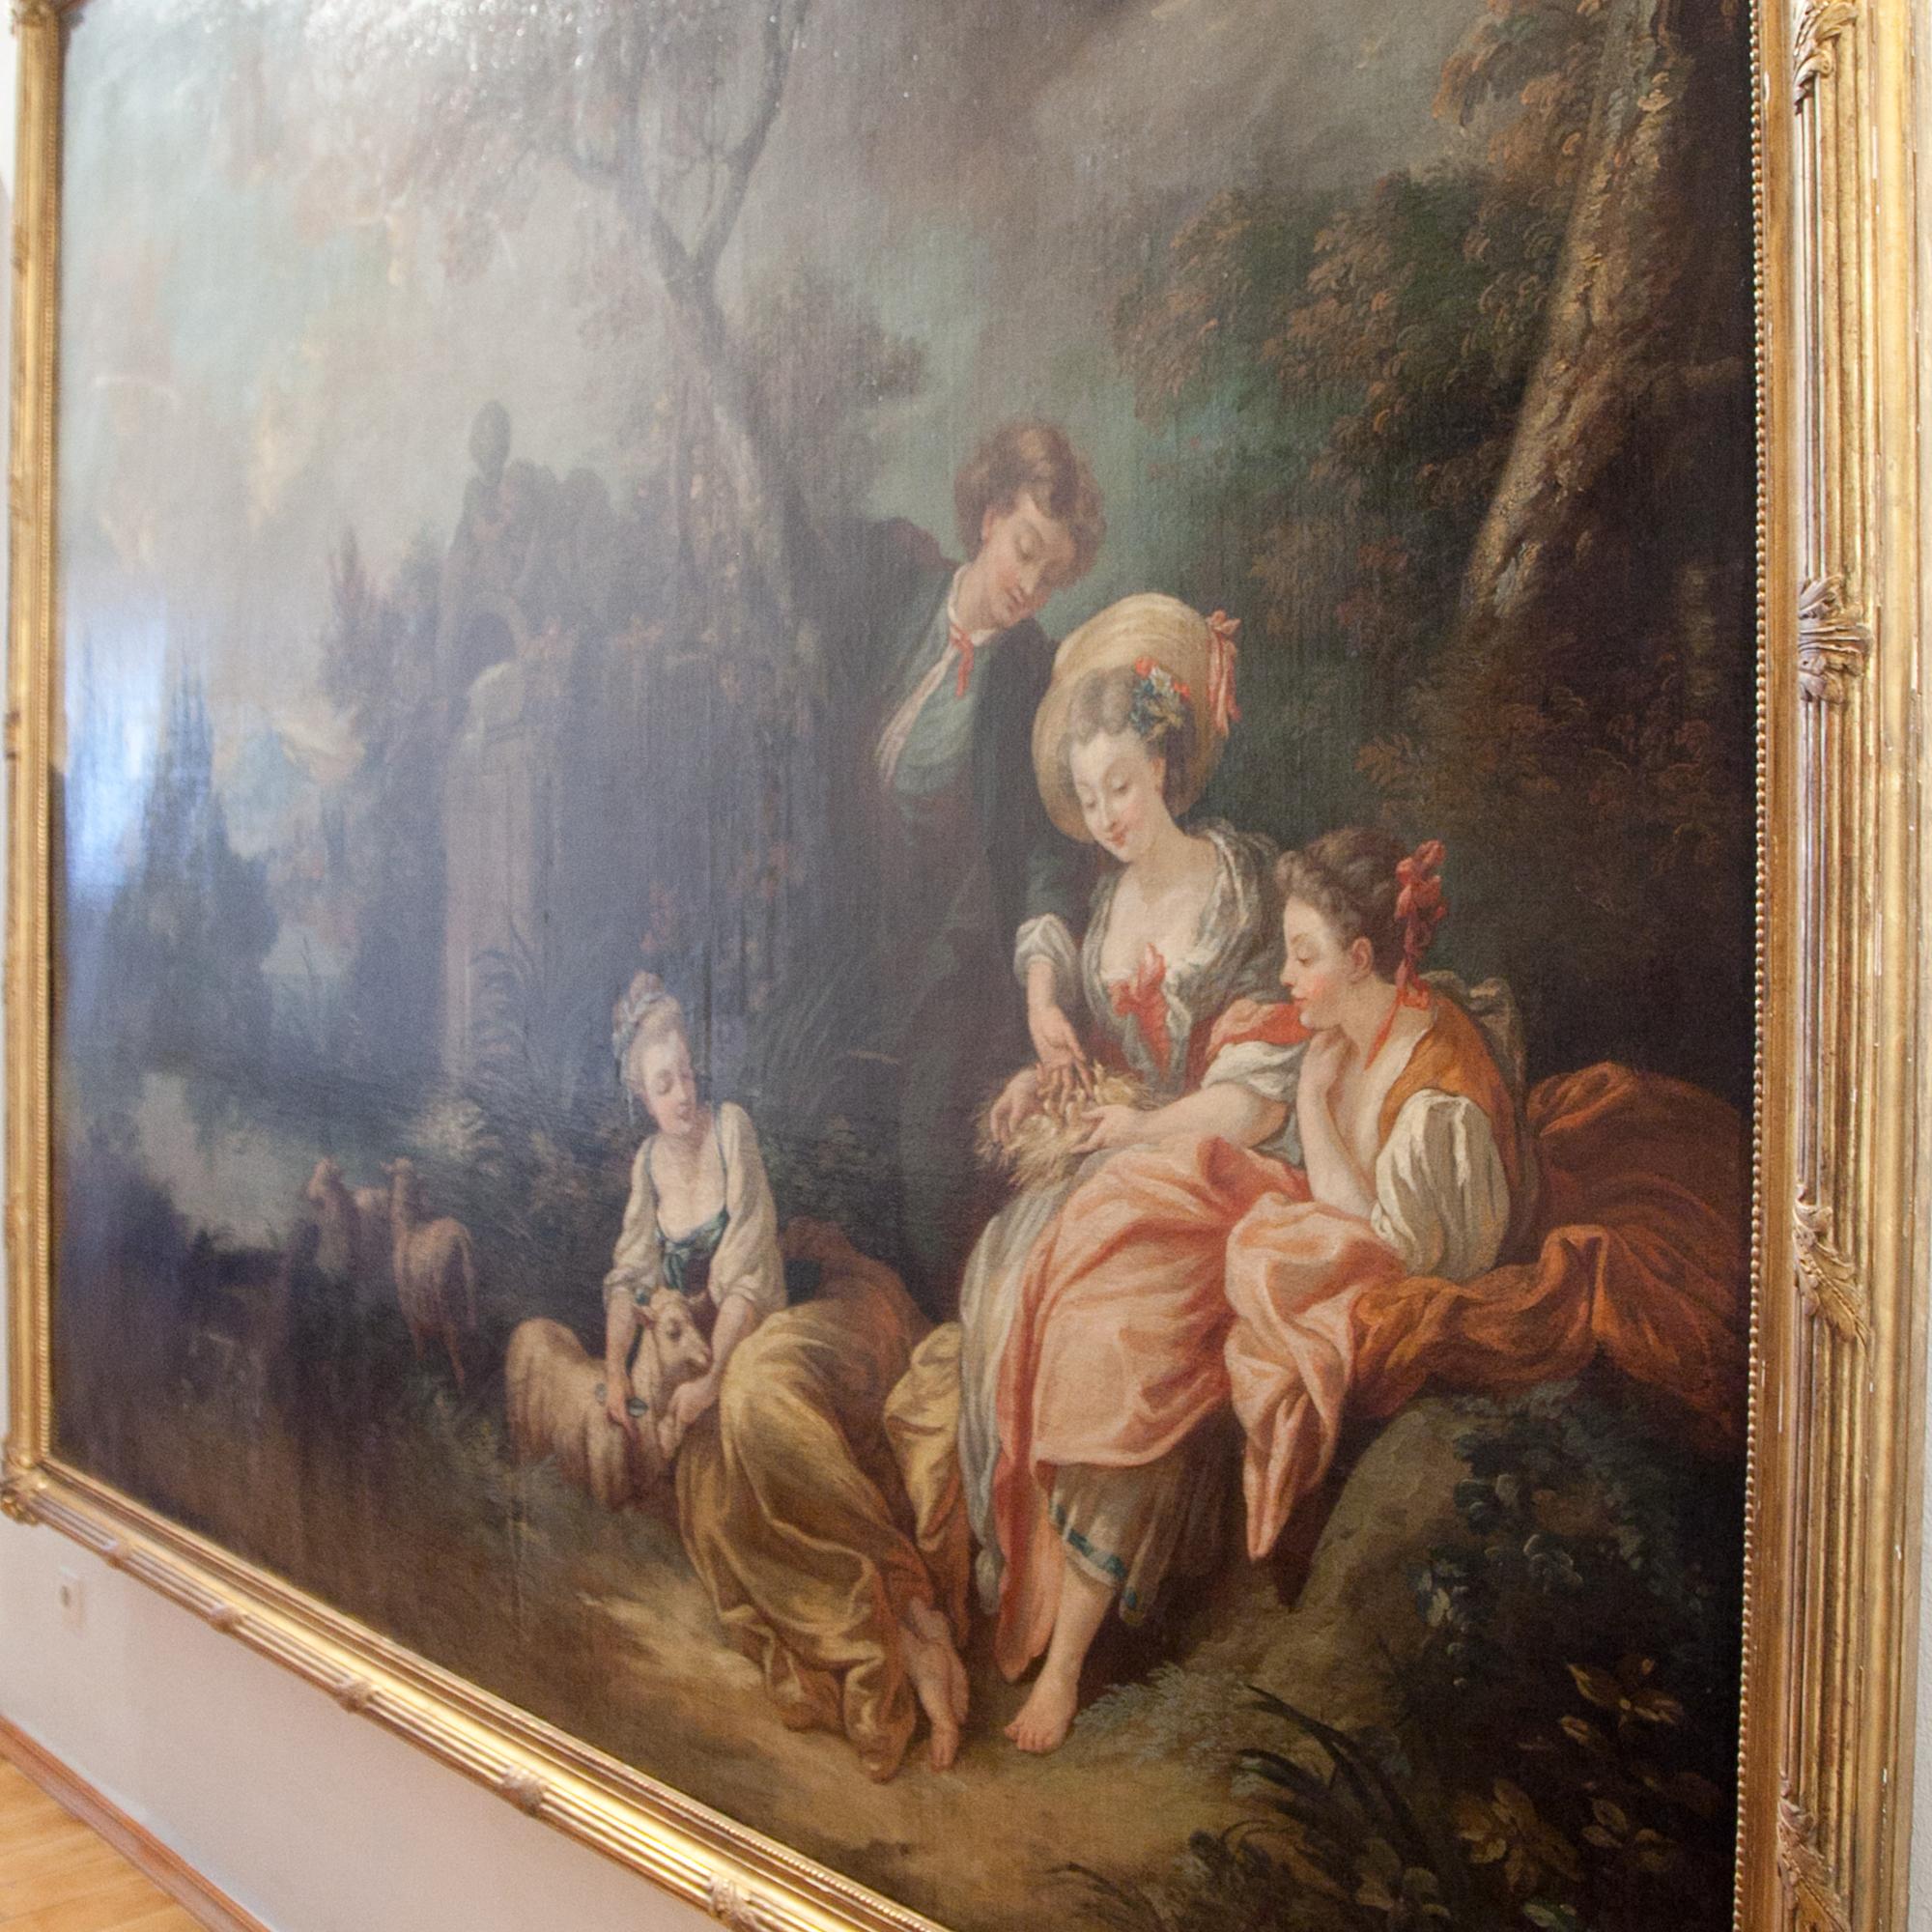 Copy of the French artist Francois Boucher, who was the court painter to King Louis XV, this work dates to the late 18th century. It is in its original carved and gilded wood frame and painted in oil on canvas.